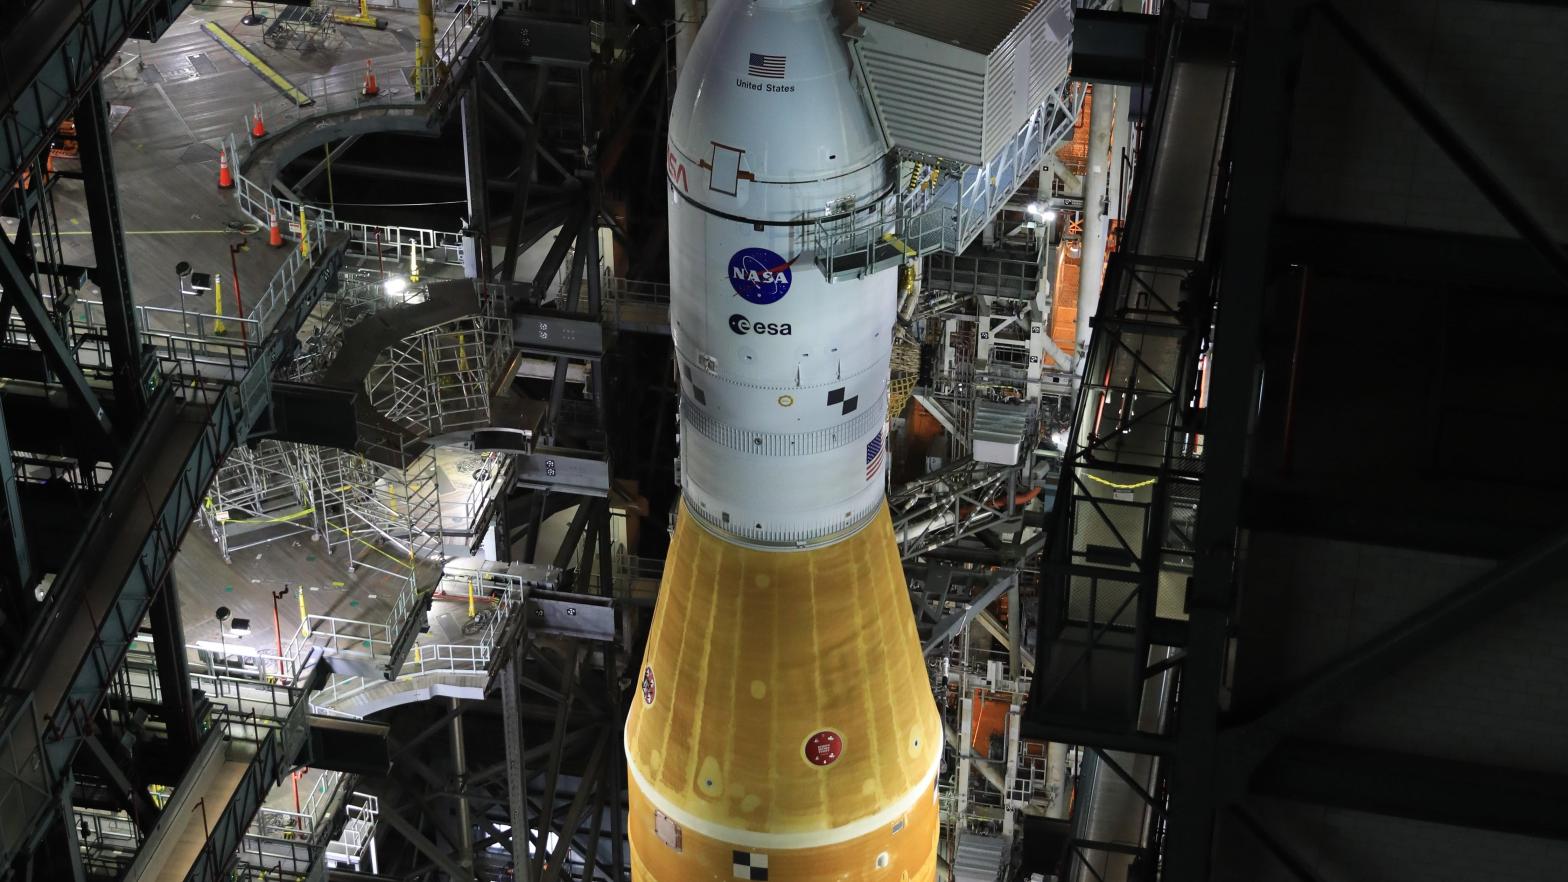 NASA's Space Launch System rocket inside the Vehicle Assembly Building. (Photo: NASA)